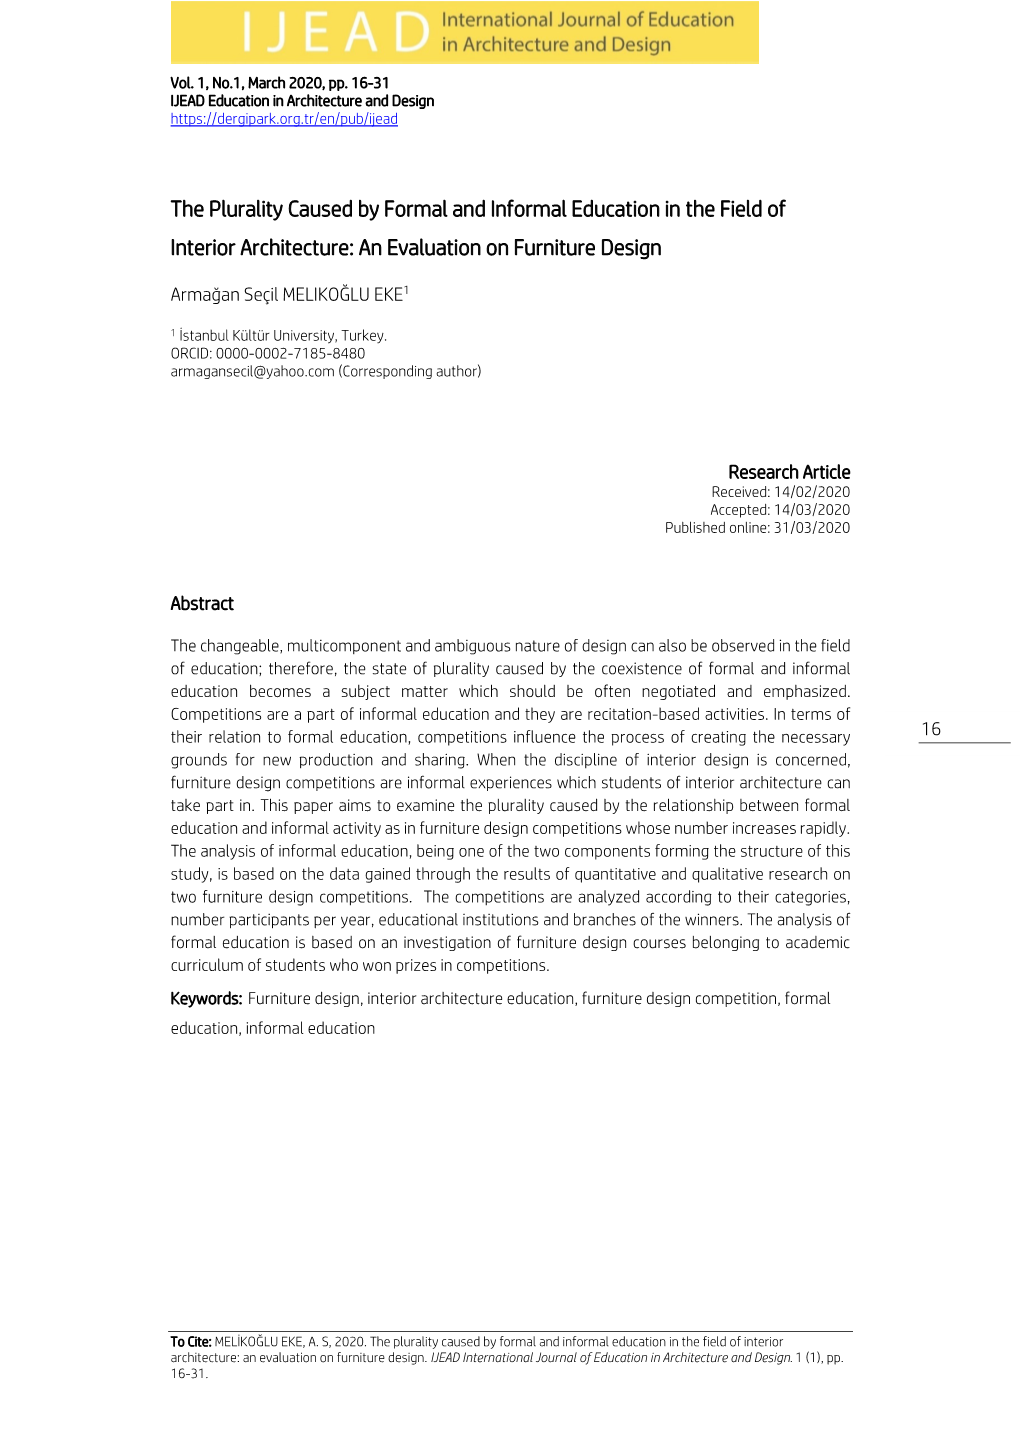 The Plurality Caused by Formal and Informal Education in the Field of Interior Architecture: an Evaluation on Furniture Design